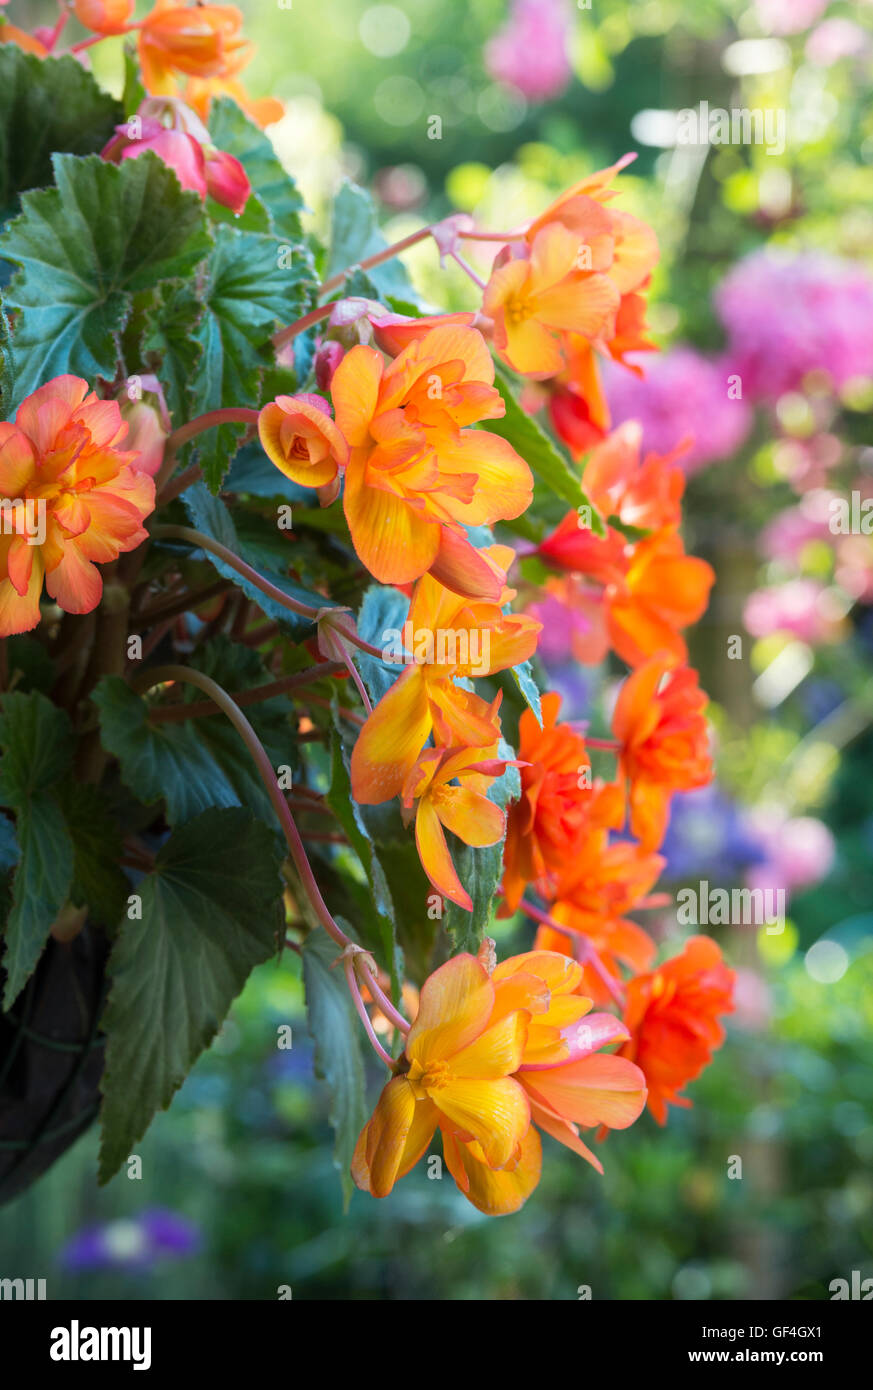 Begonia 'Apricot sparkle' flowers in a hanging basket Stock Photo